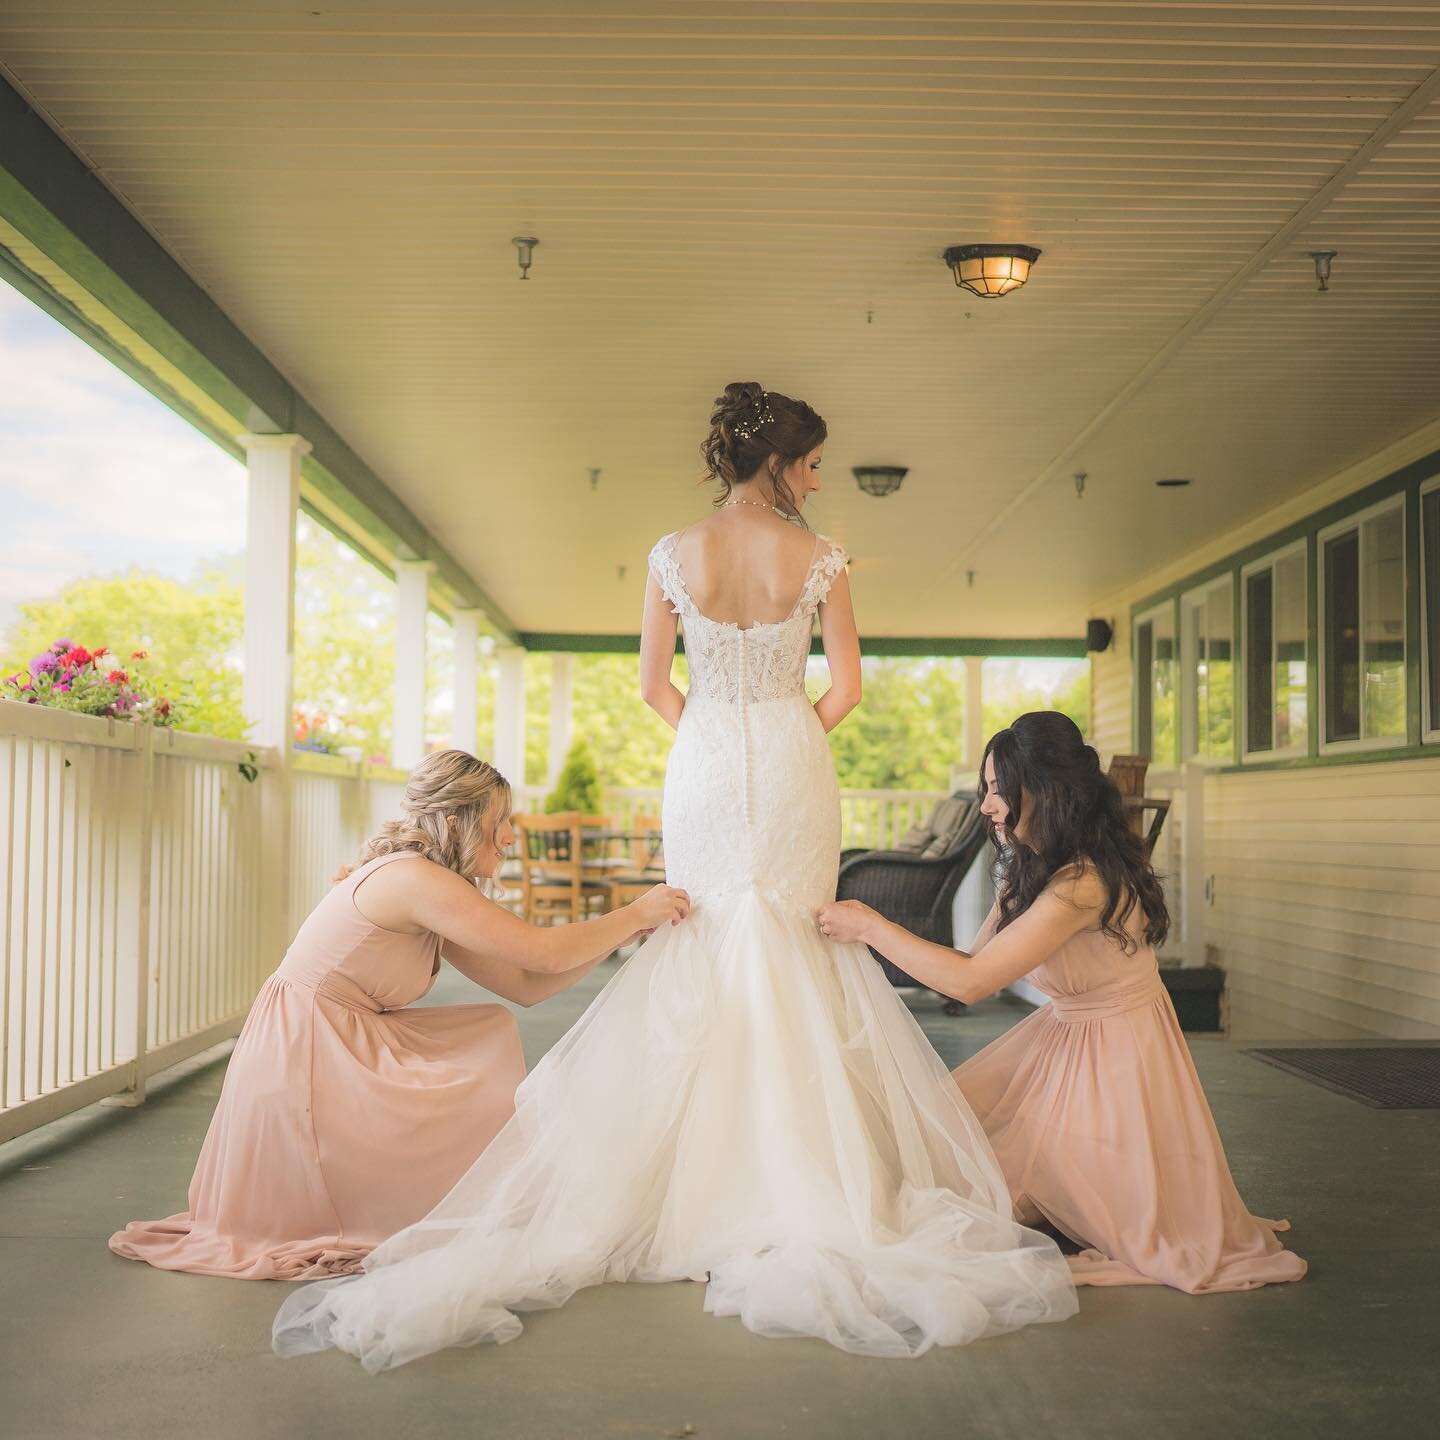 Moments like these 💗

#bridesmaids #bestfriends #wedding #weddingday #weddingphotographer #weddingphotography #bostonweddingphotographer #bostonweddingsmagazine #bostonweddingphotography #bride #countrylife #countrylivingmagazine #vermontlife